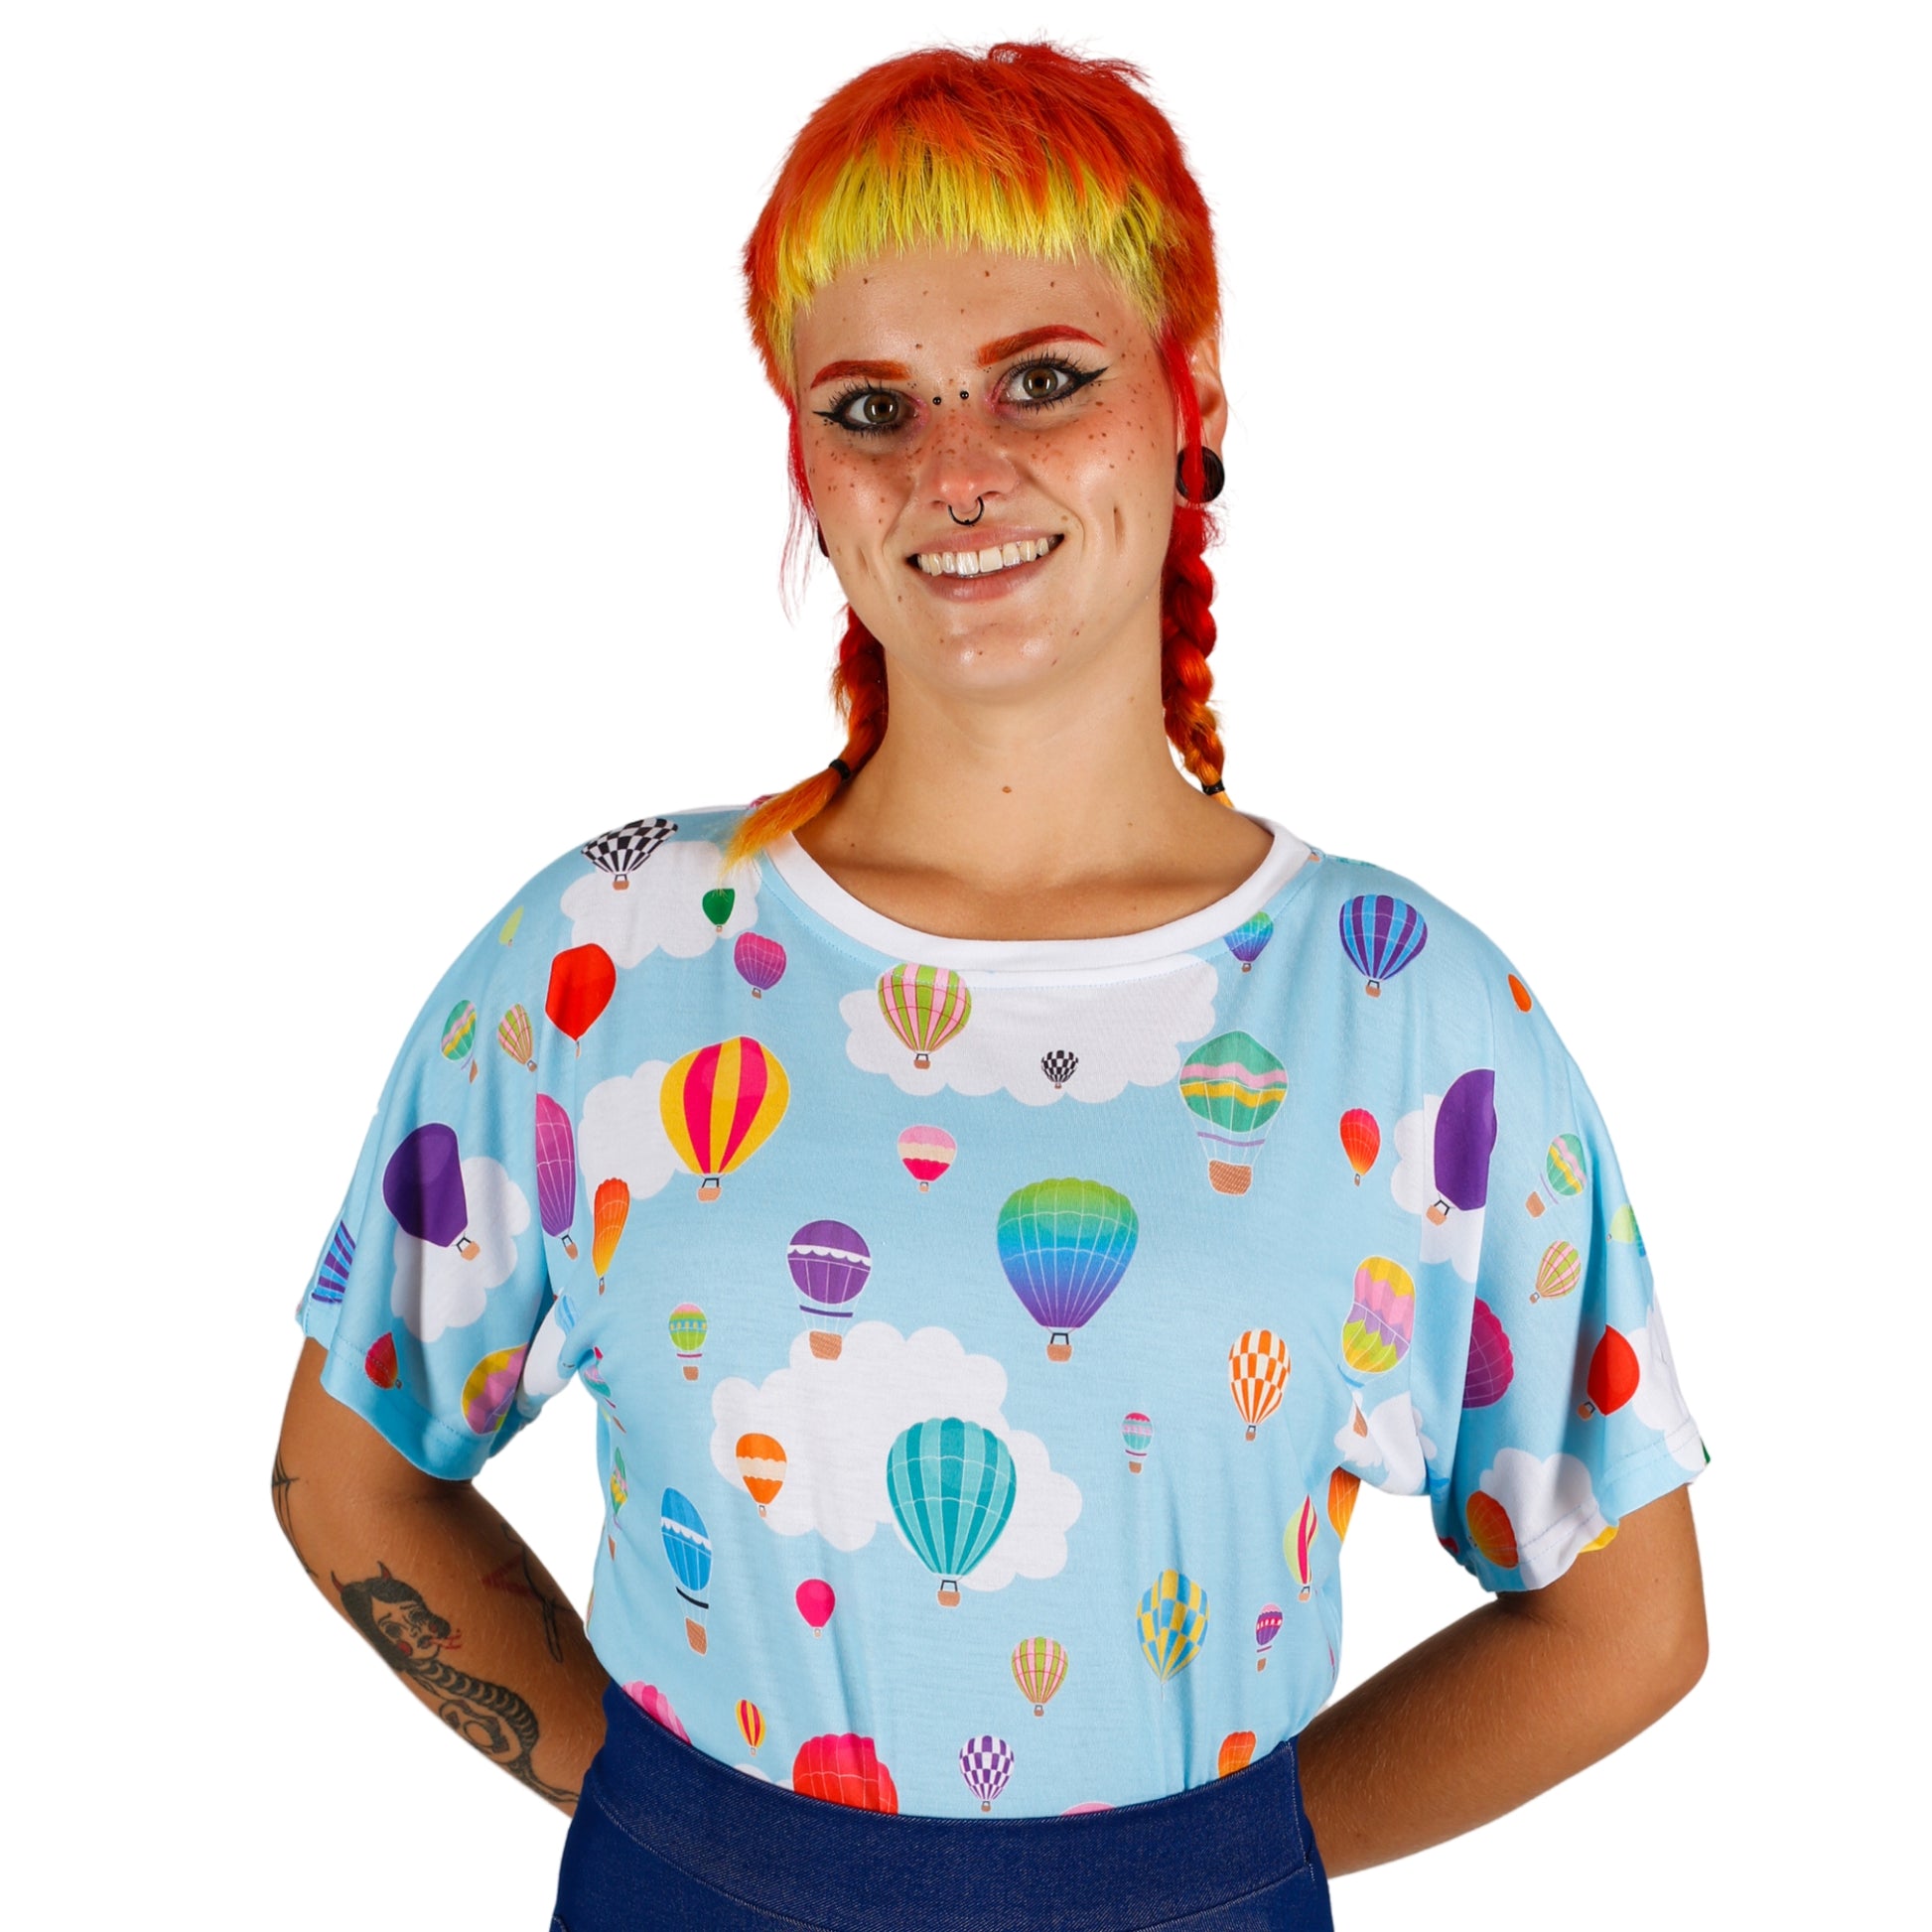 Whimsy Batwing Top by RainbowsAndFairies.com.au (Balloons - Hot Air Balloon - Knit Top - Vintage Inspired - Retro Shirt - Kitsch) - SKU: CL_BATOP_WHIMS_RBW - Pic-03